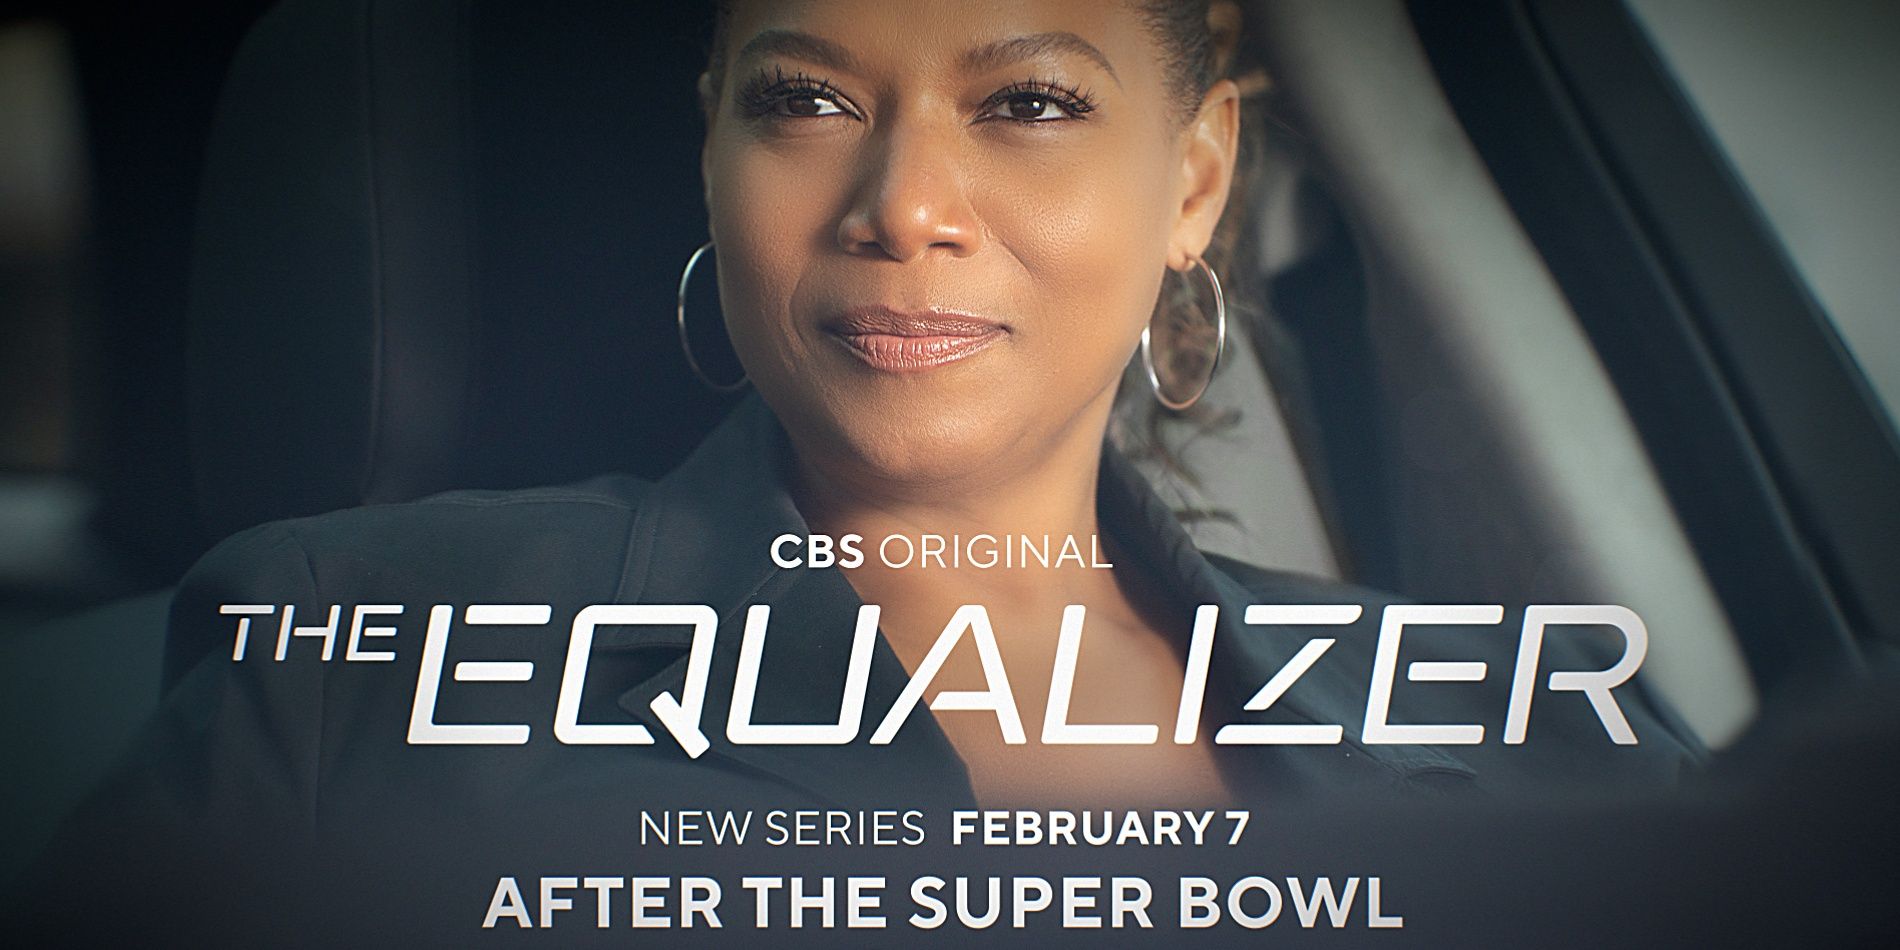 The Equalizer airs after the Super Bowl